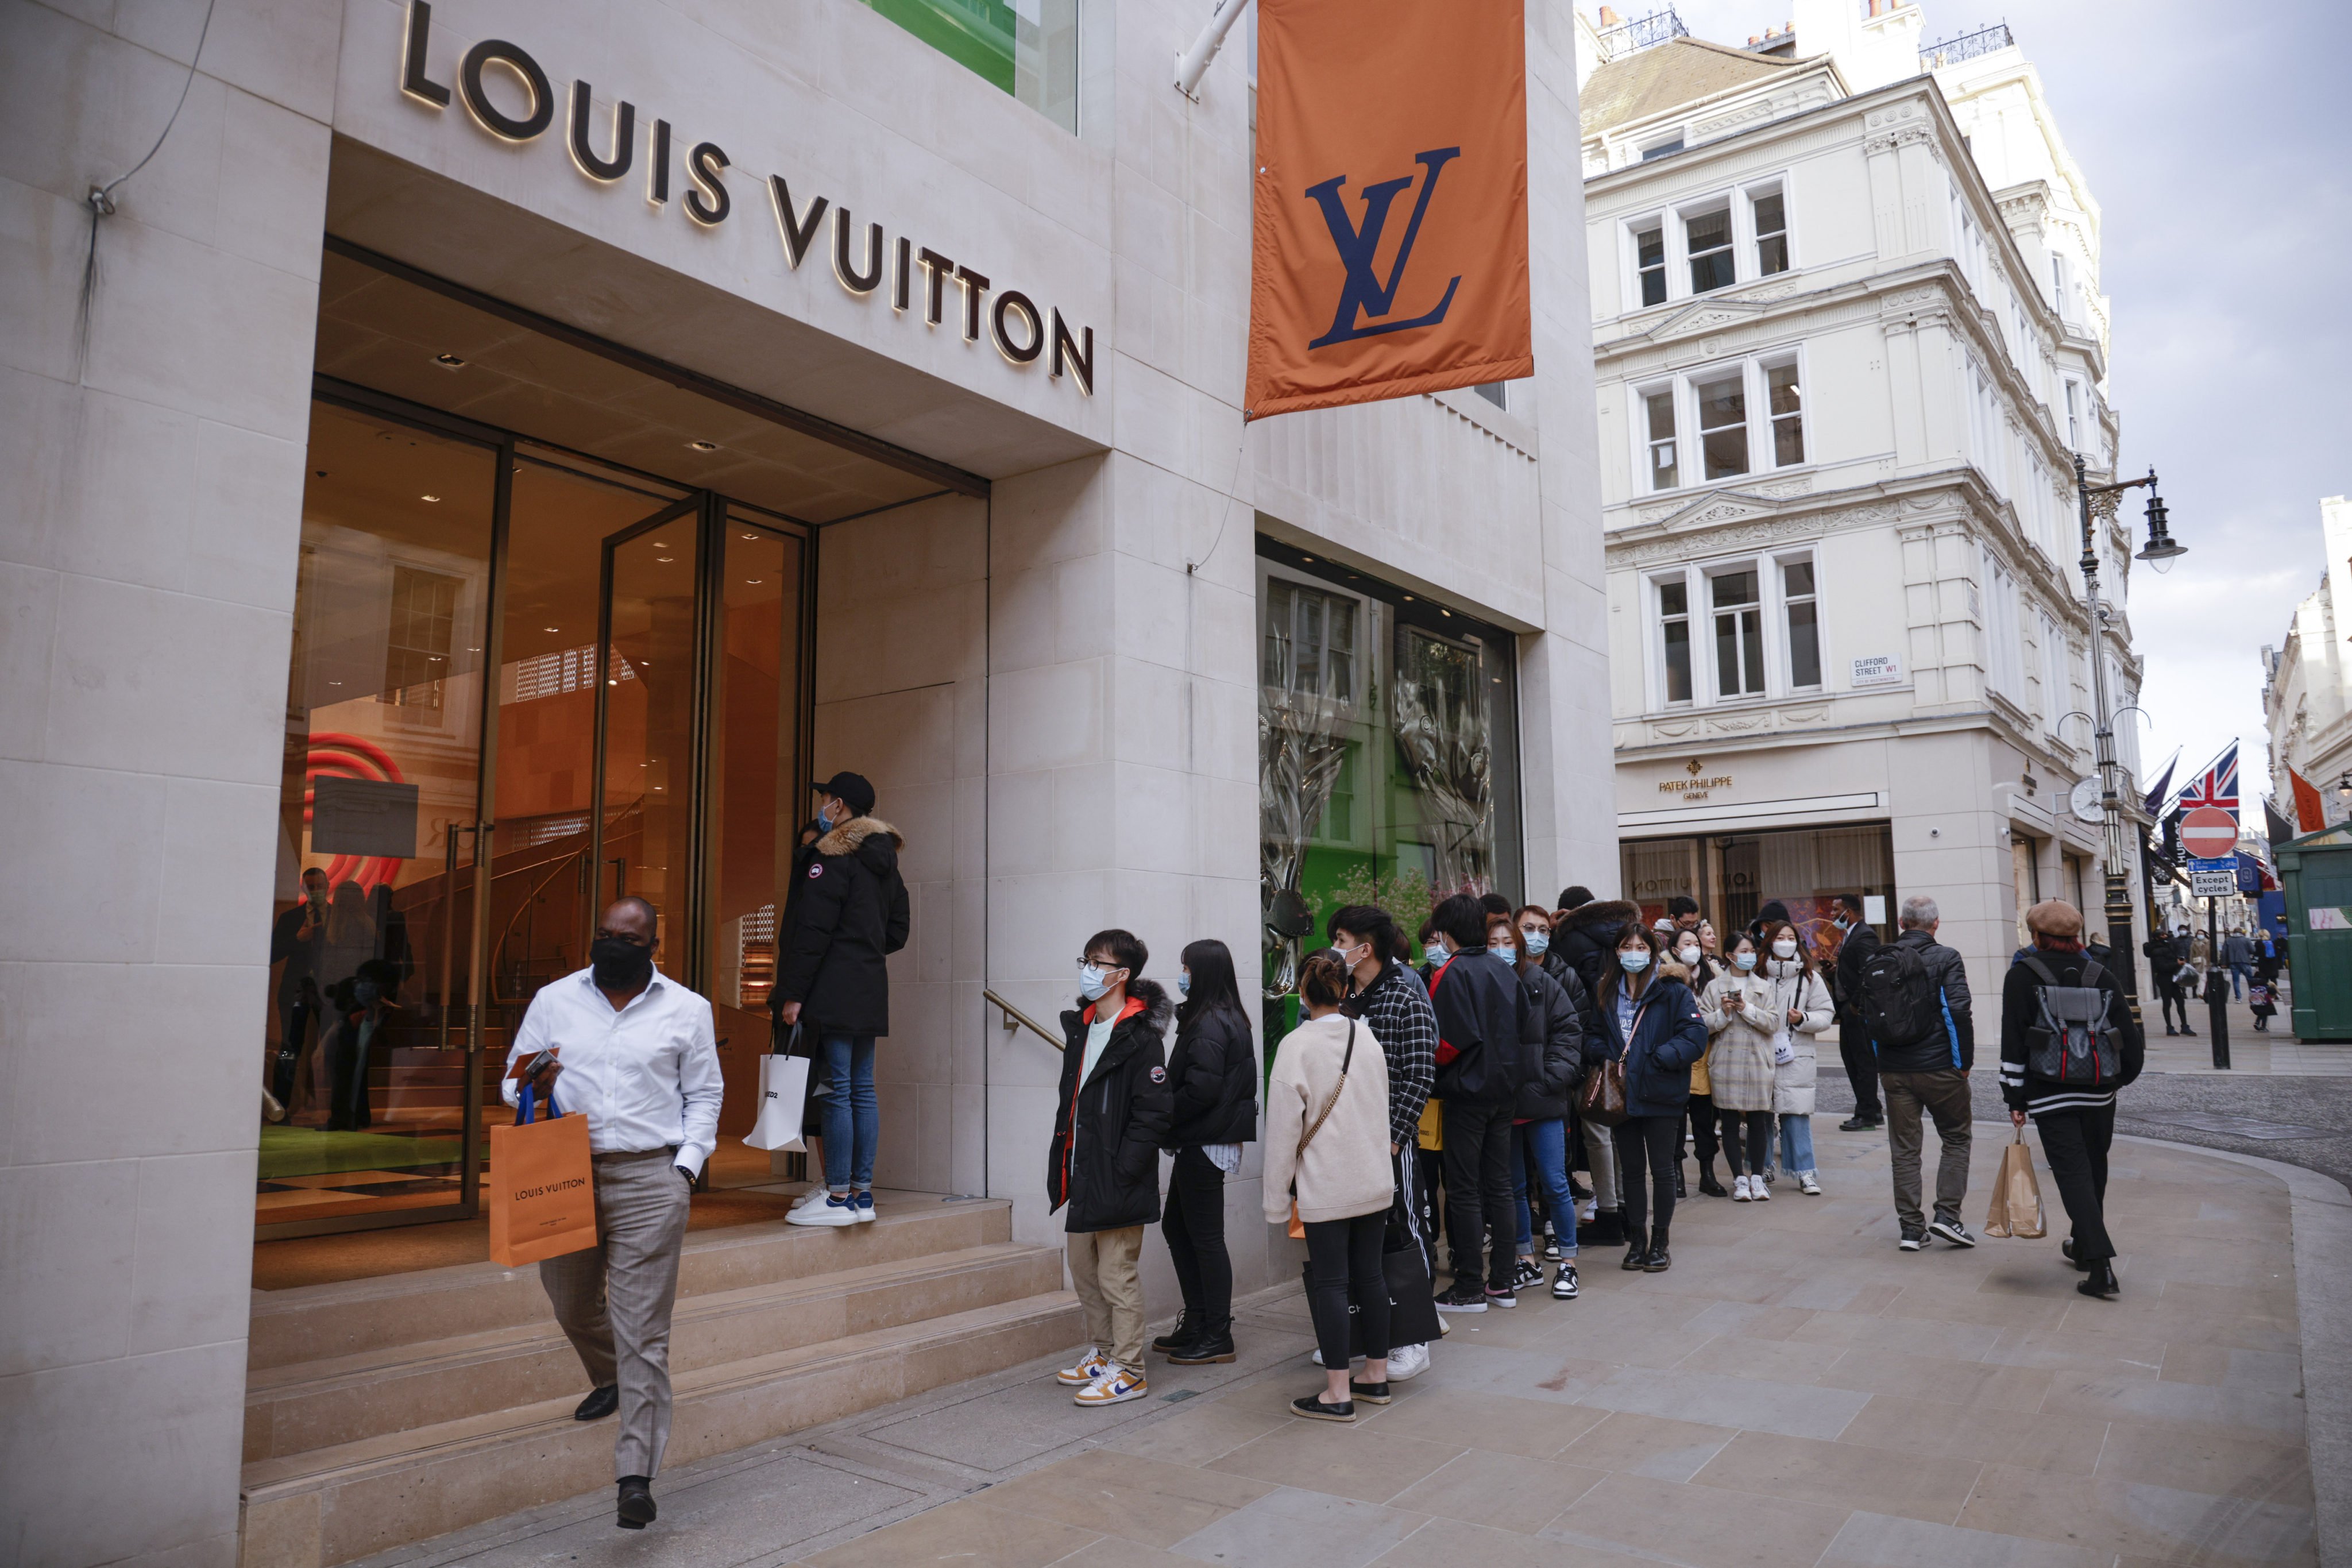 Louis vuitton new bond street london hi-res stock photography and